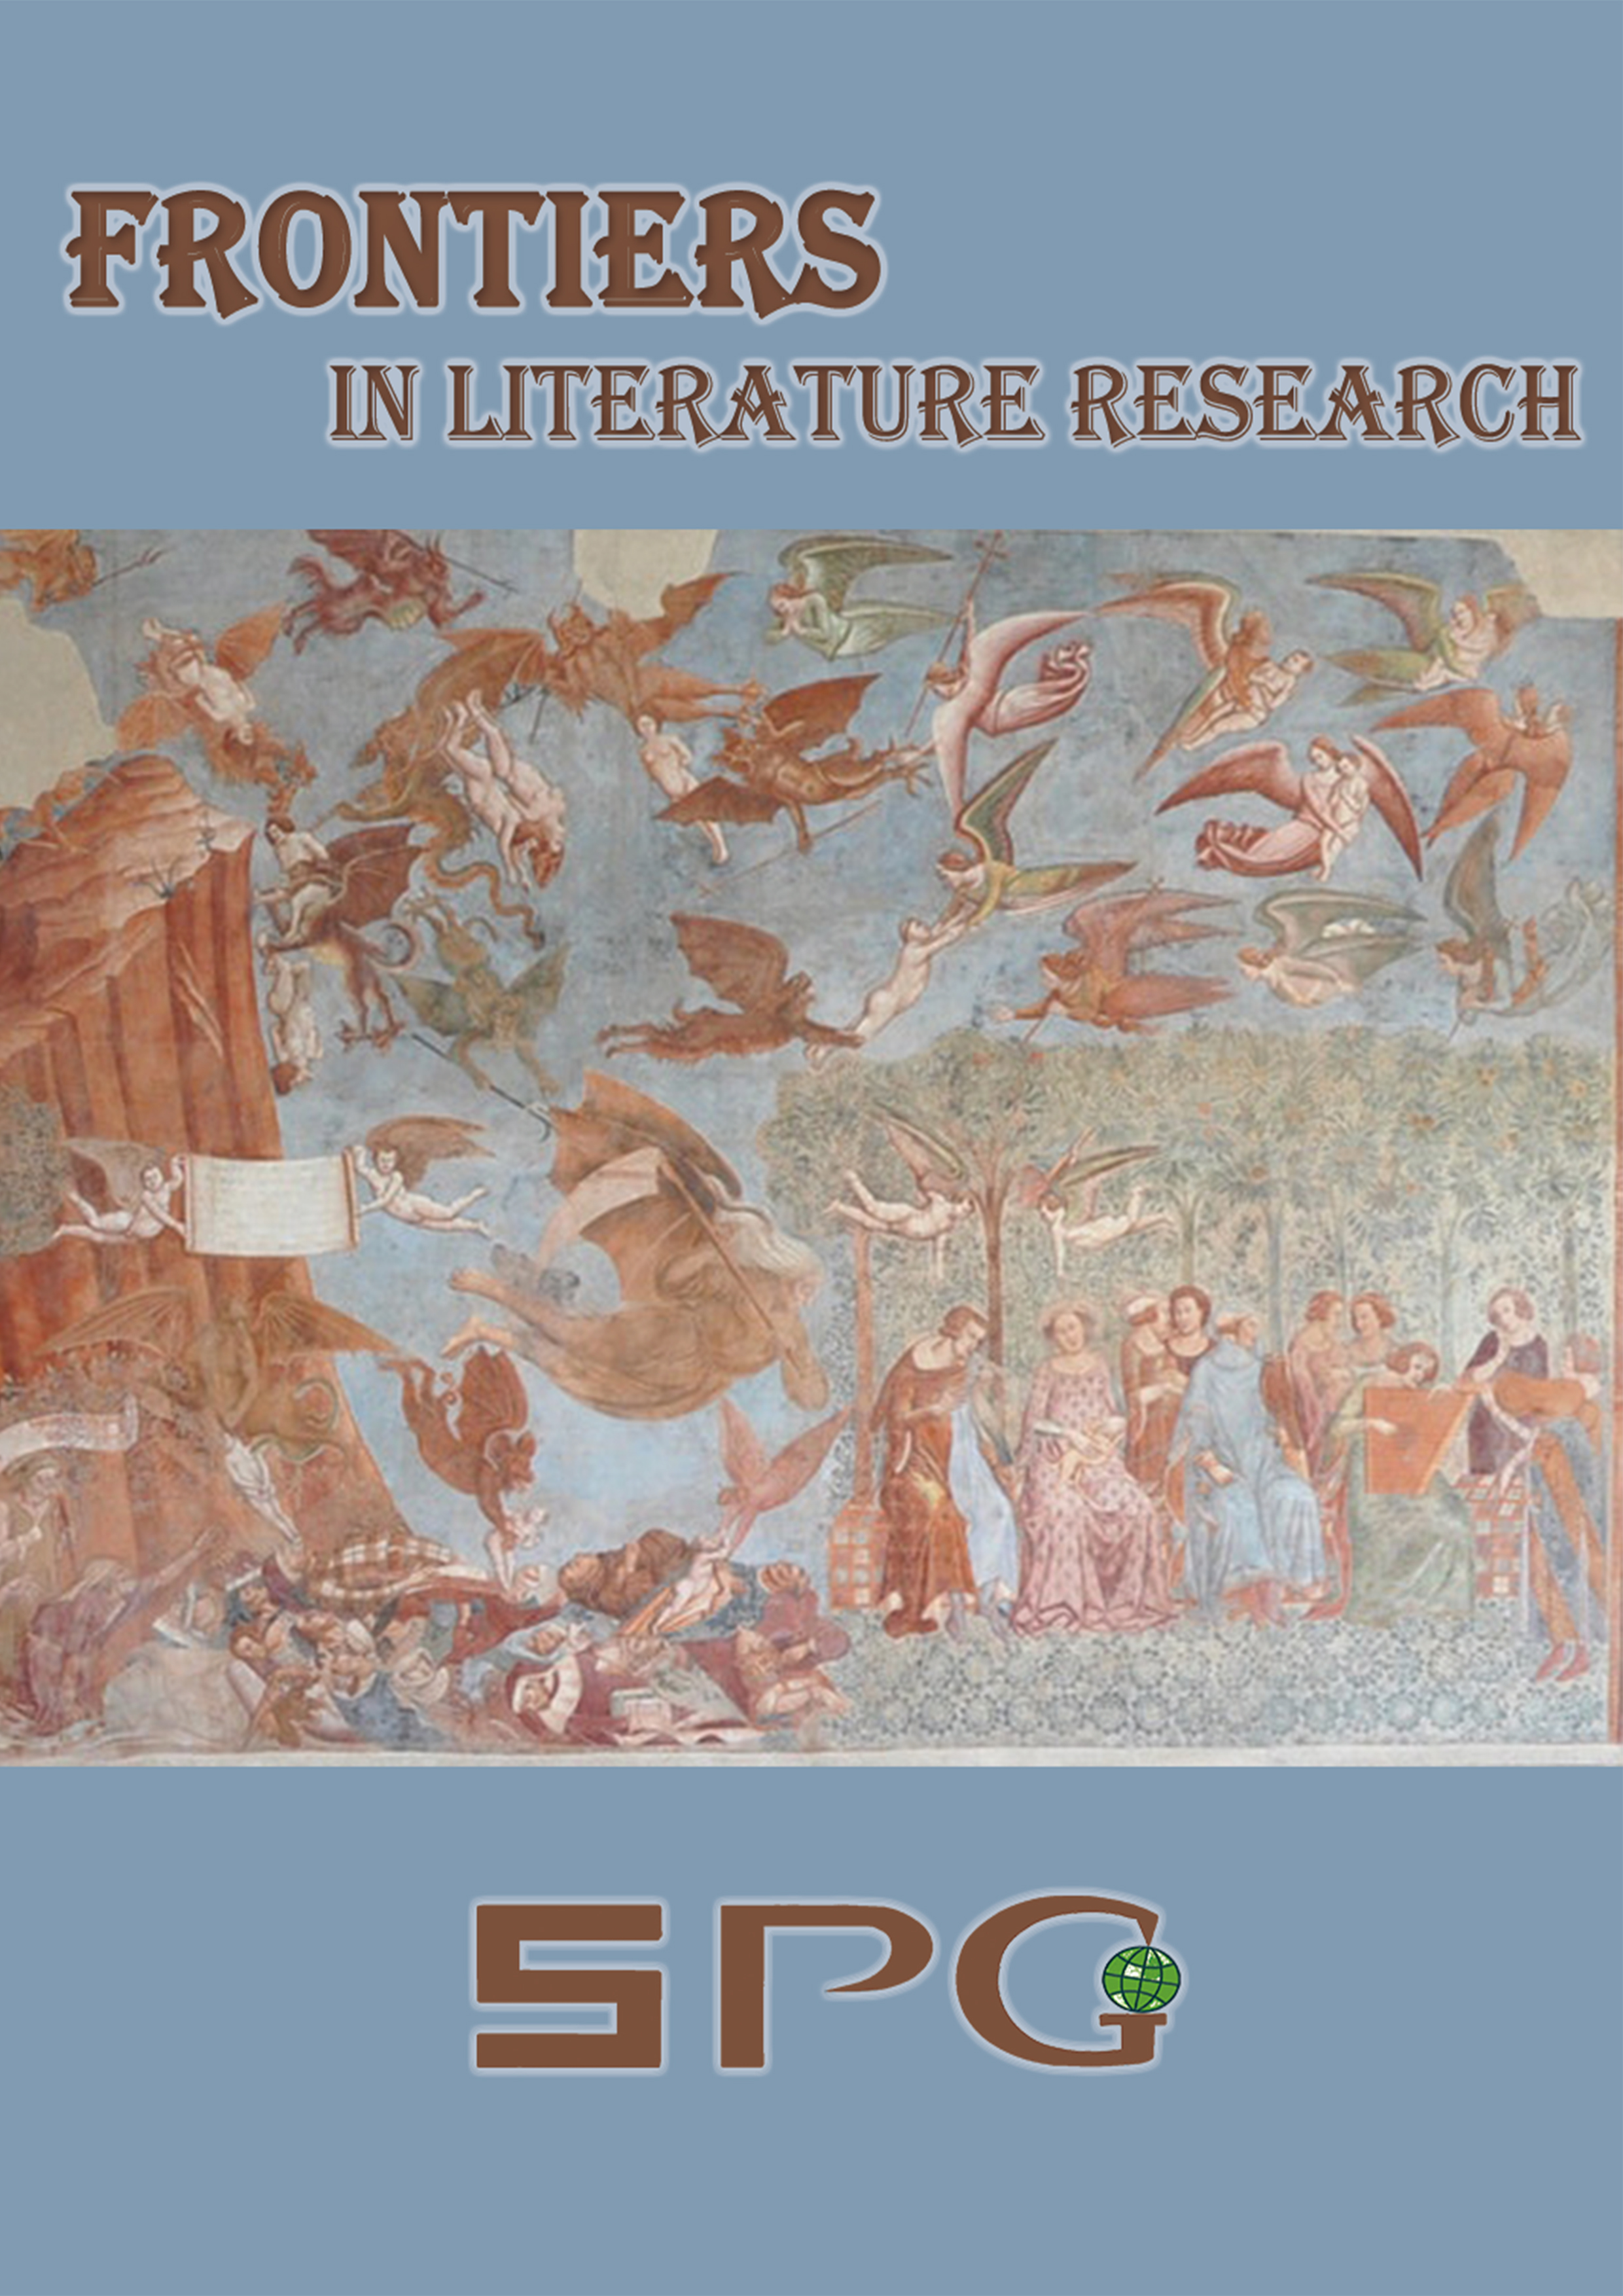 Frontiers in Literature Research | Scholar Publishing Group